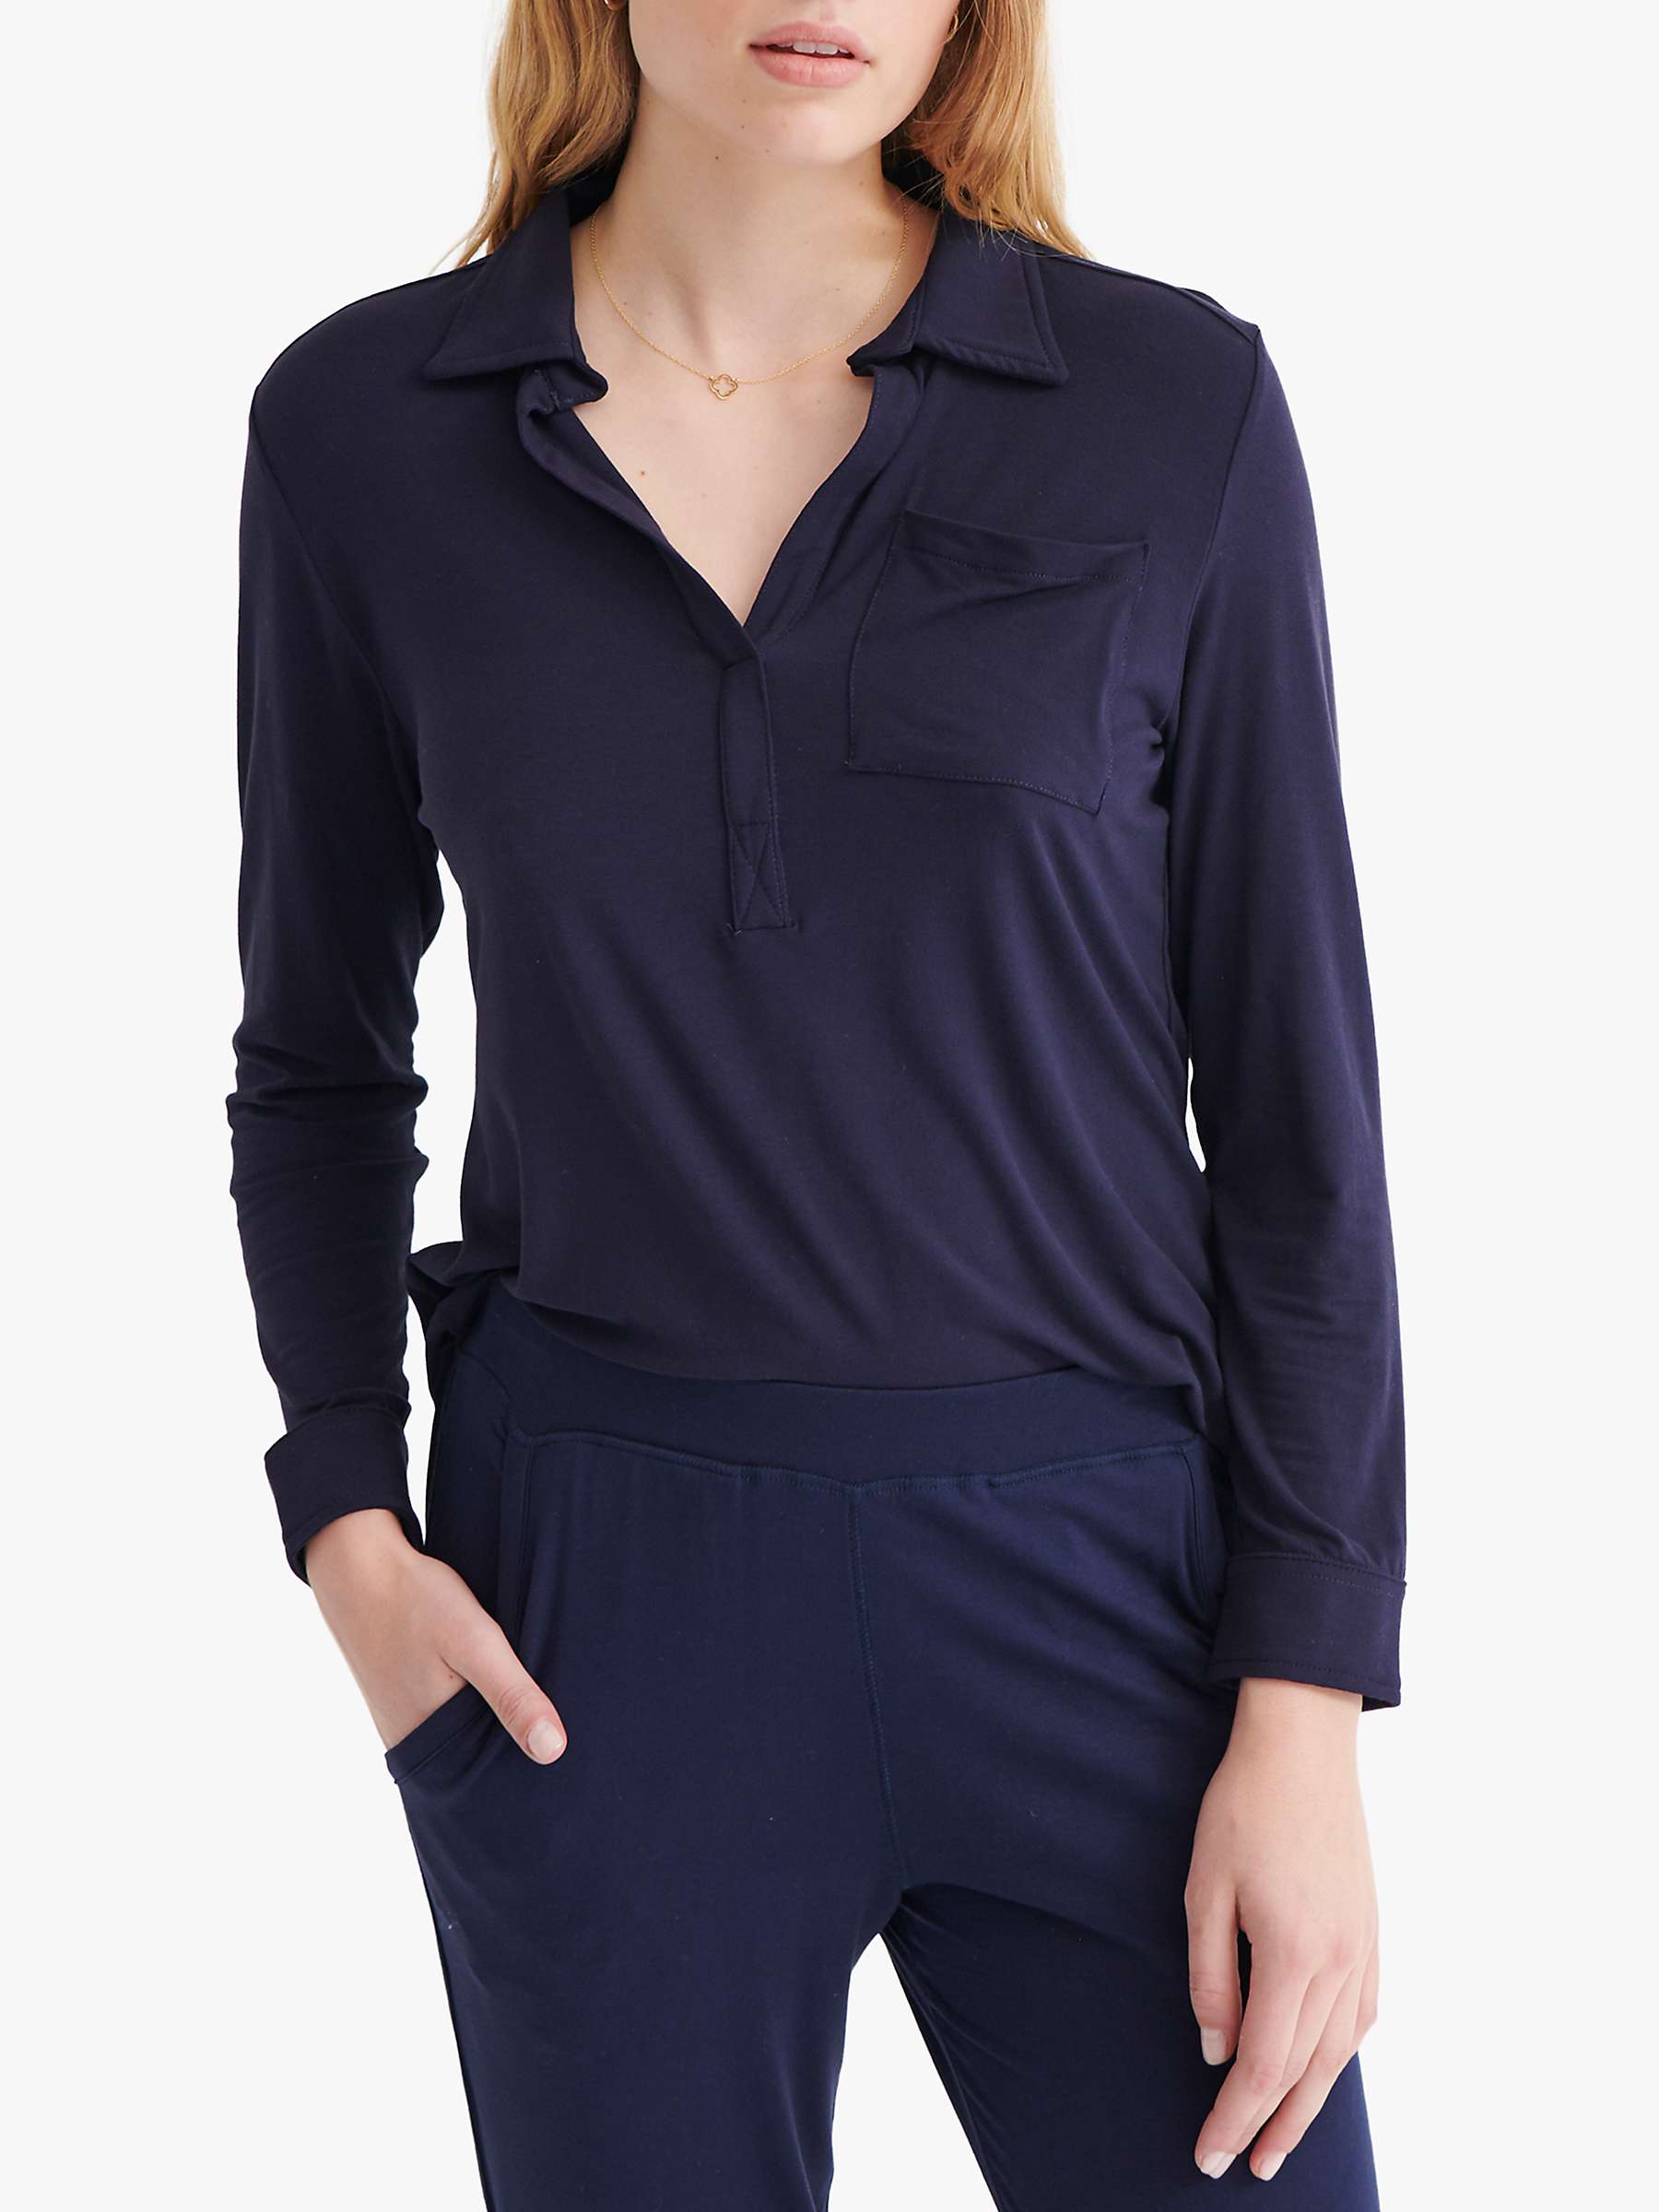 Buy NRBY Evie Jersey Blouse, Navy Online at johnlewis.com